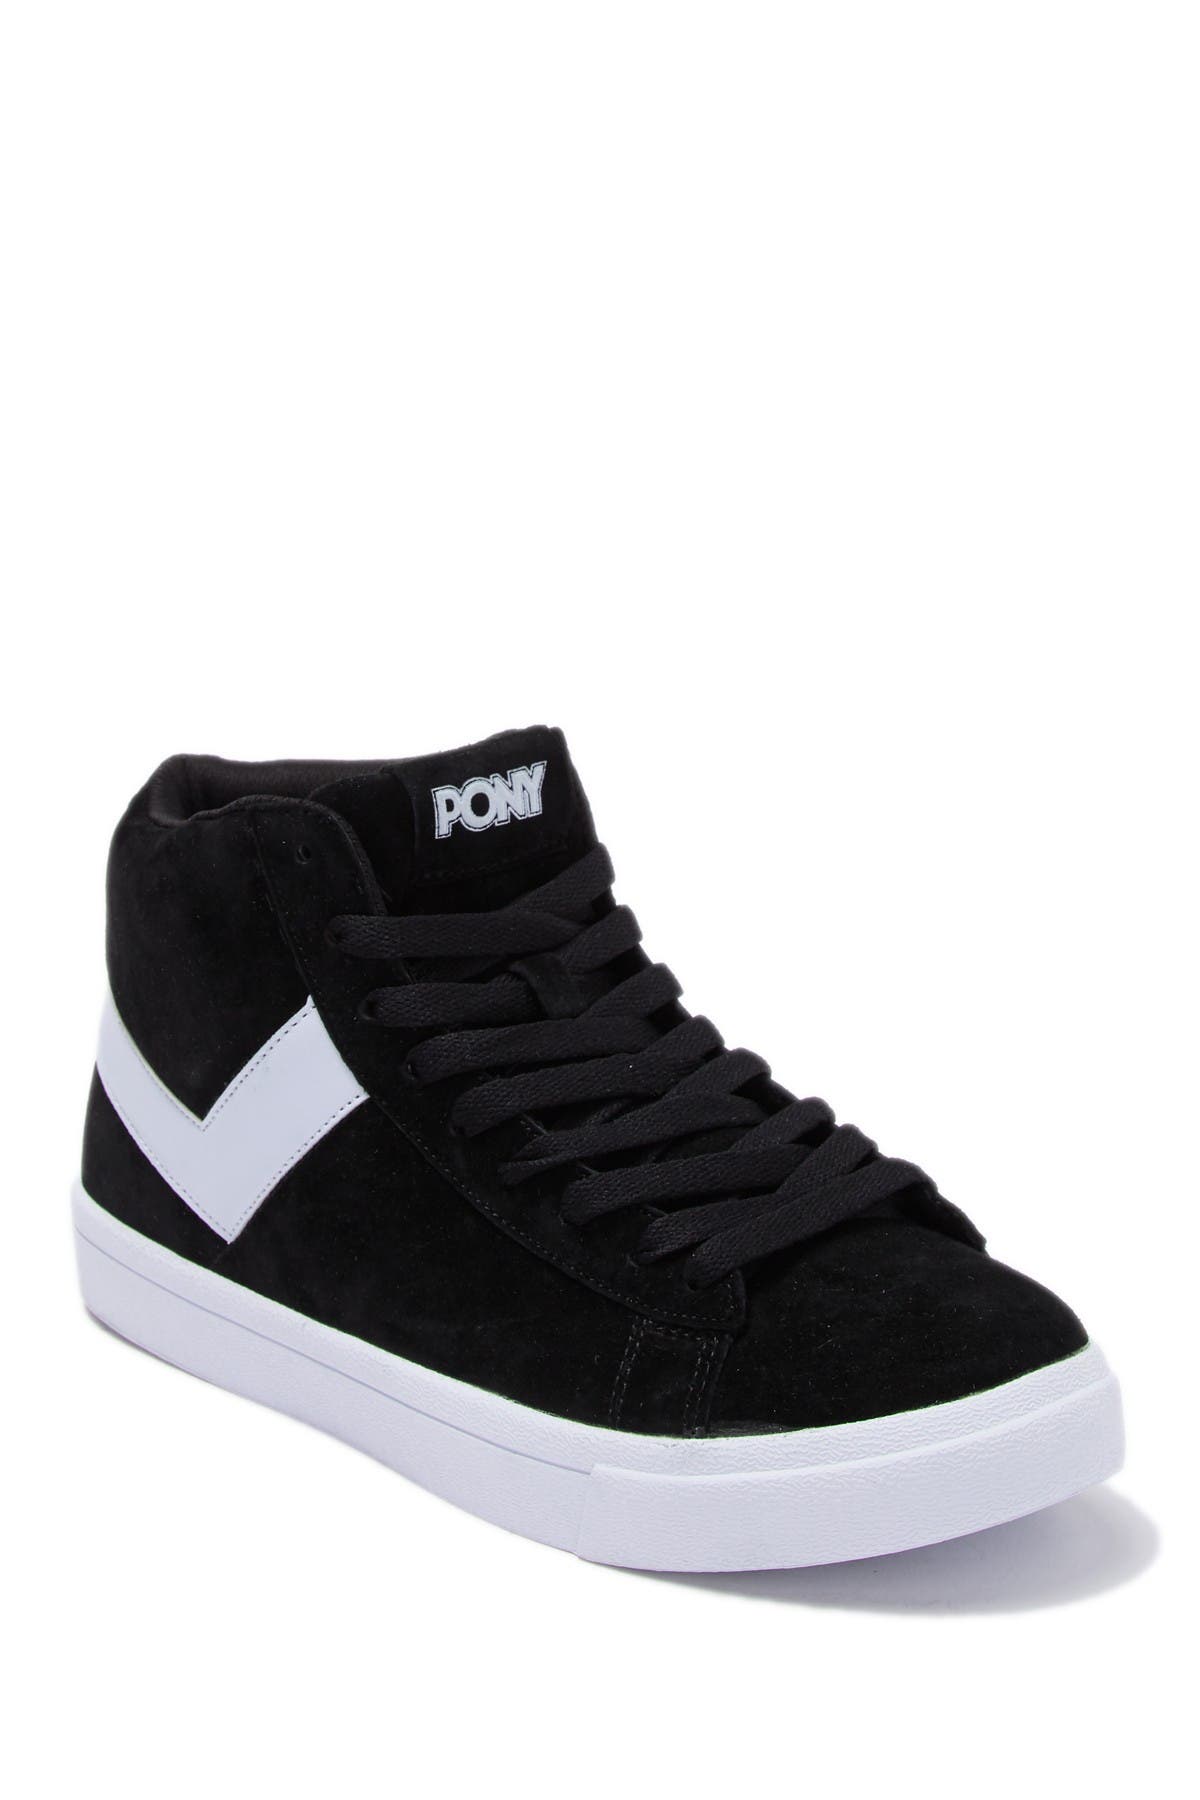 pony shoes high top